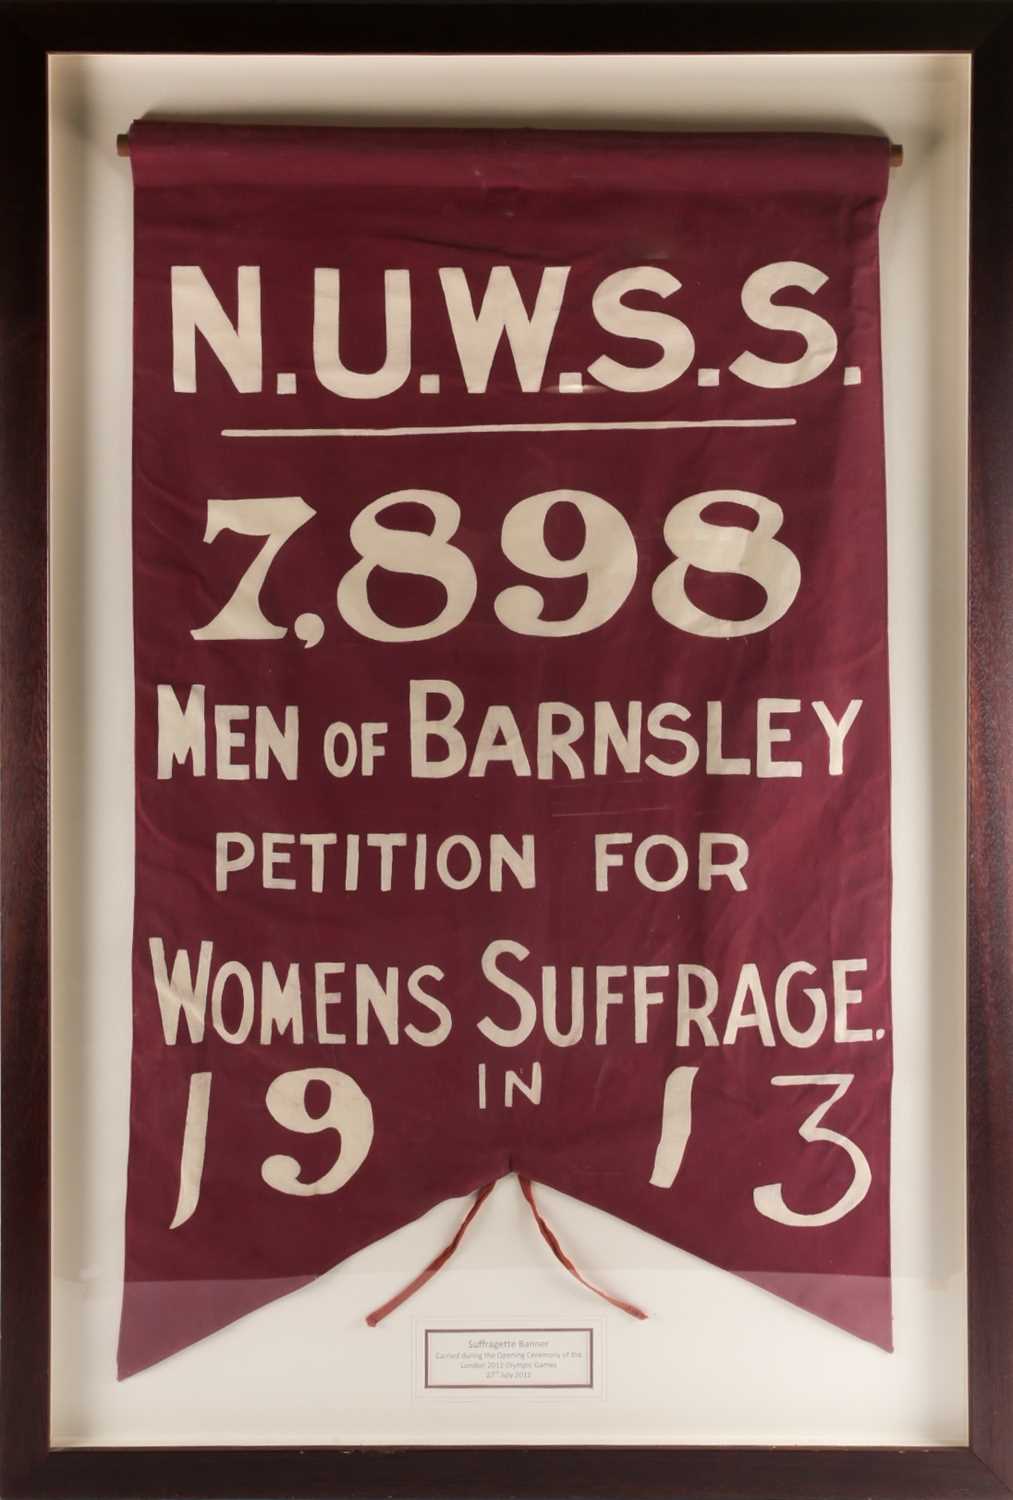 A framed, painted canvas Suffragette Banner, bearing the legend 'N.U.W.S.S. 7,898 Men of Barnsley